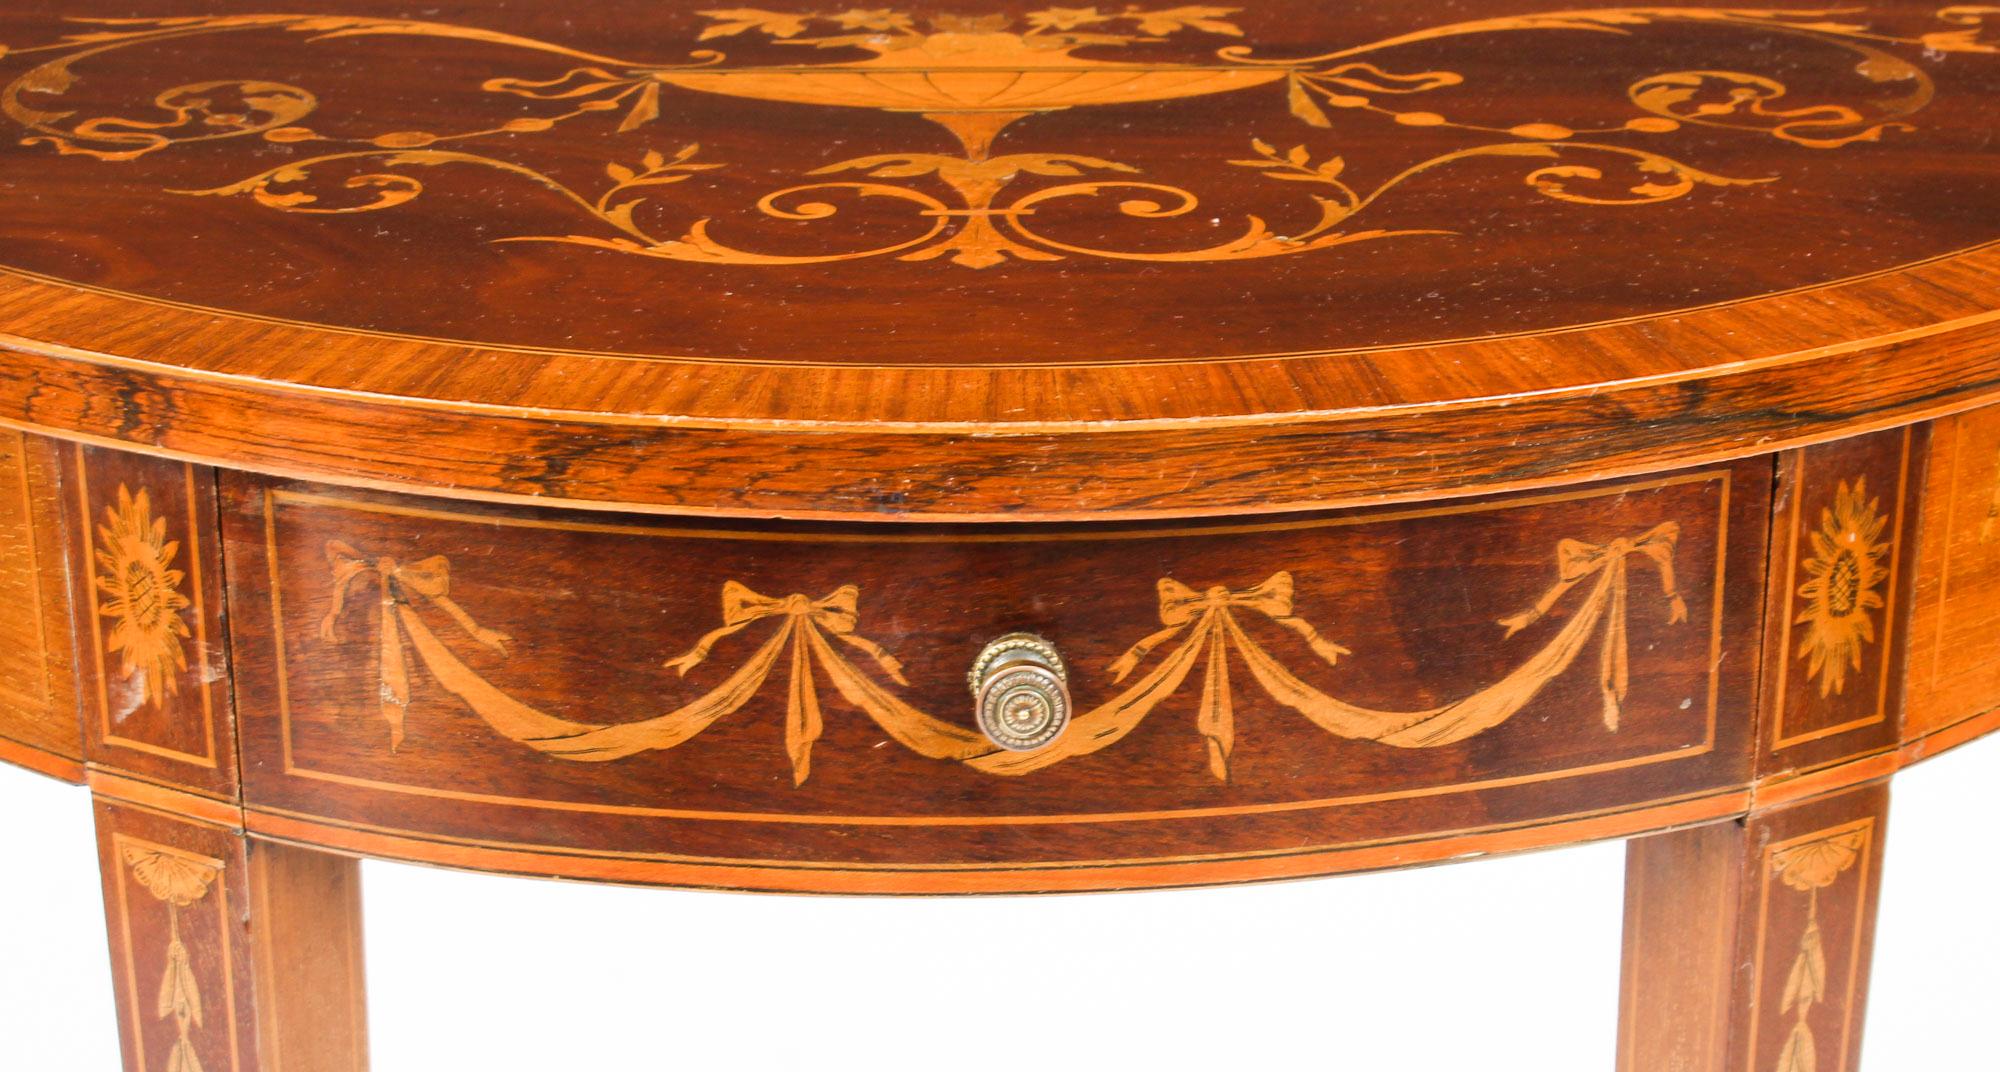 English Antique Regency Revival Marquetry Demilune Console Table, 19th Century